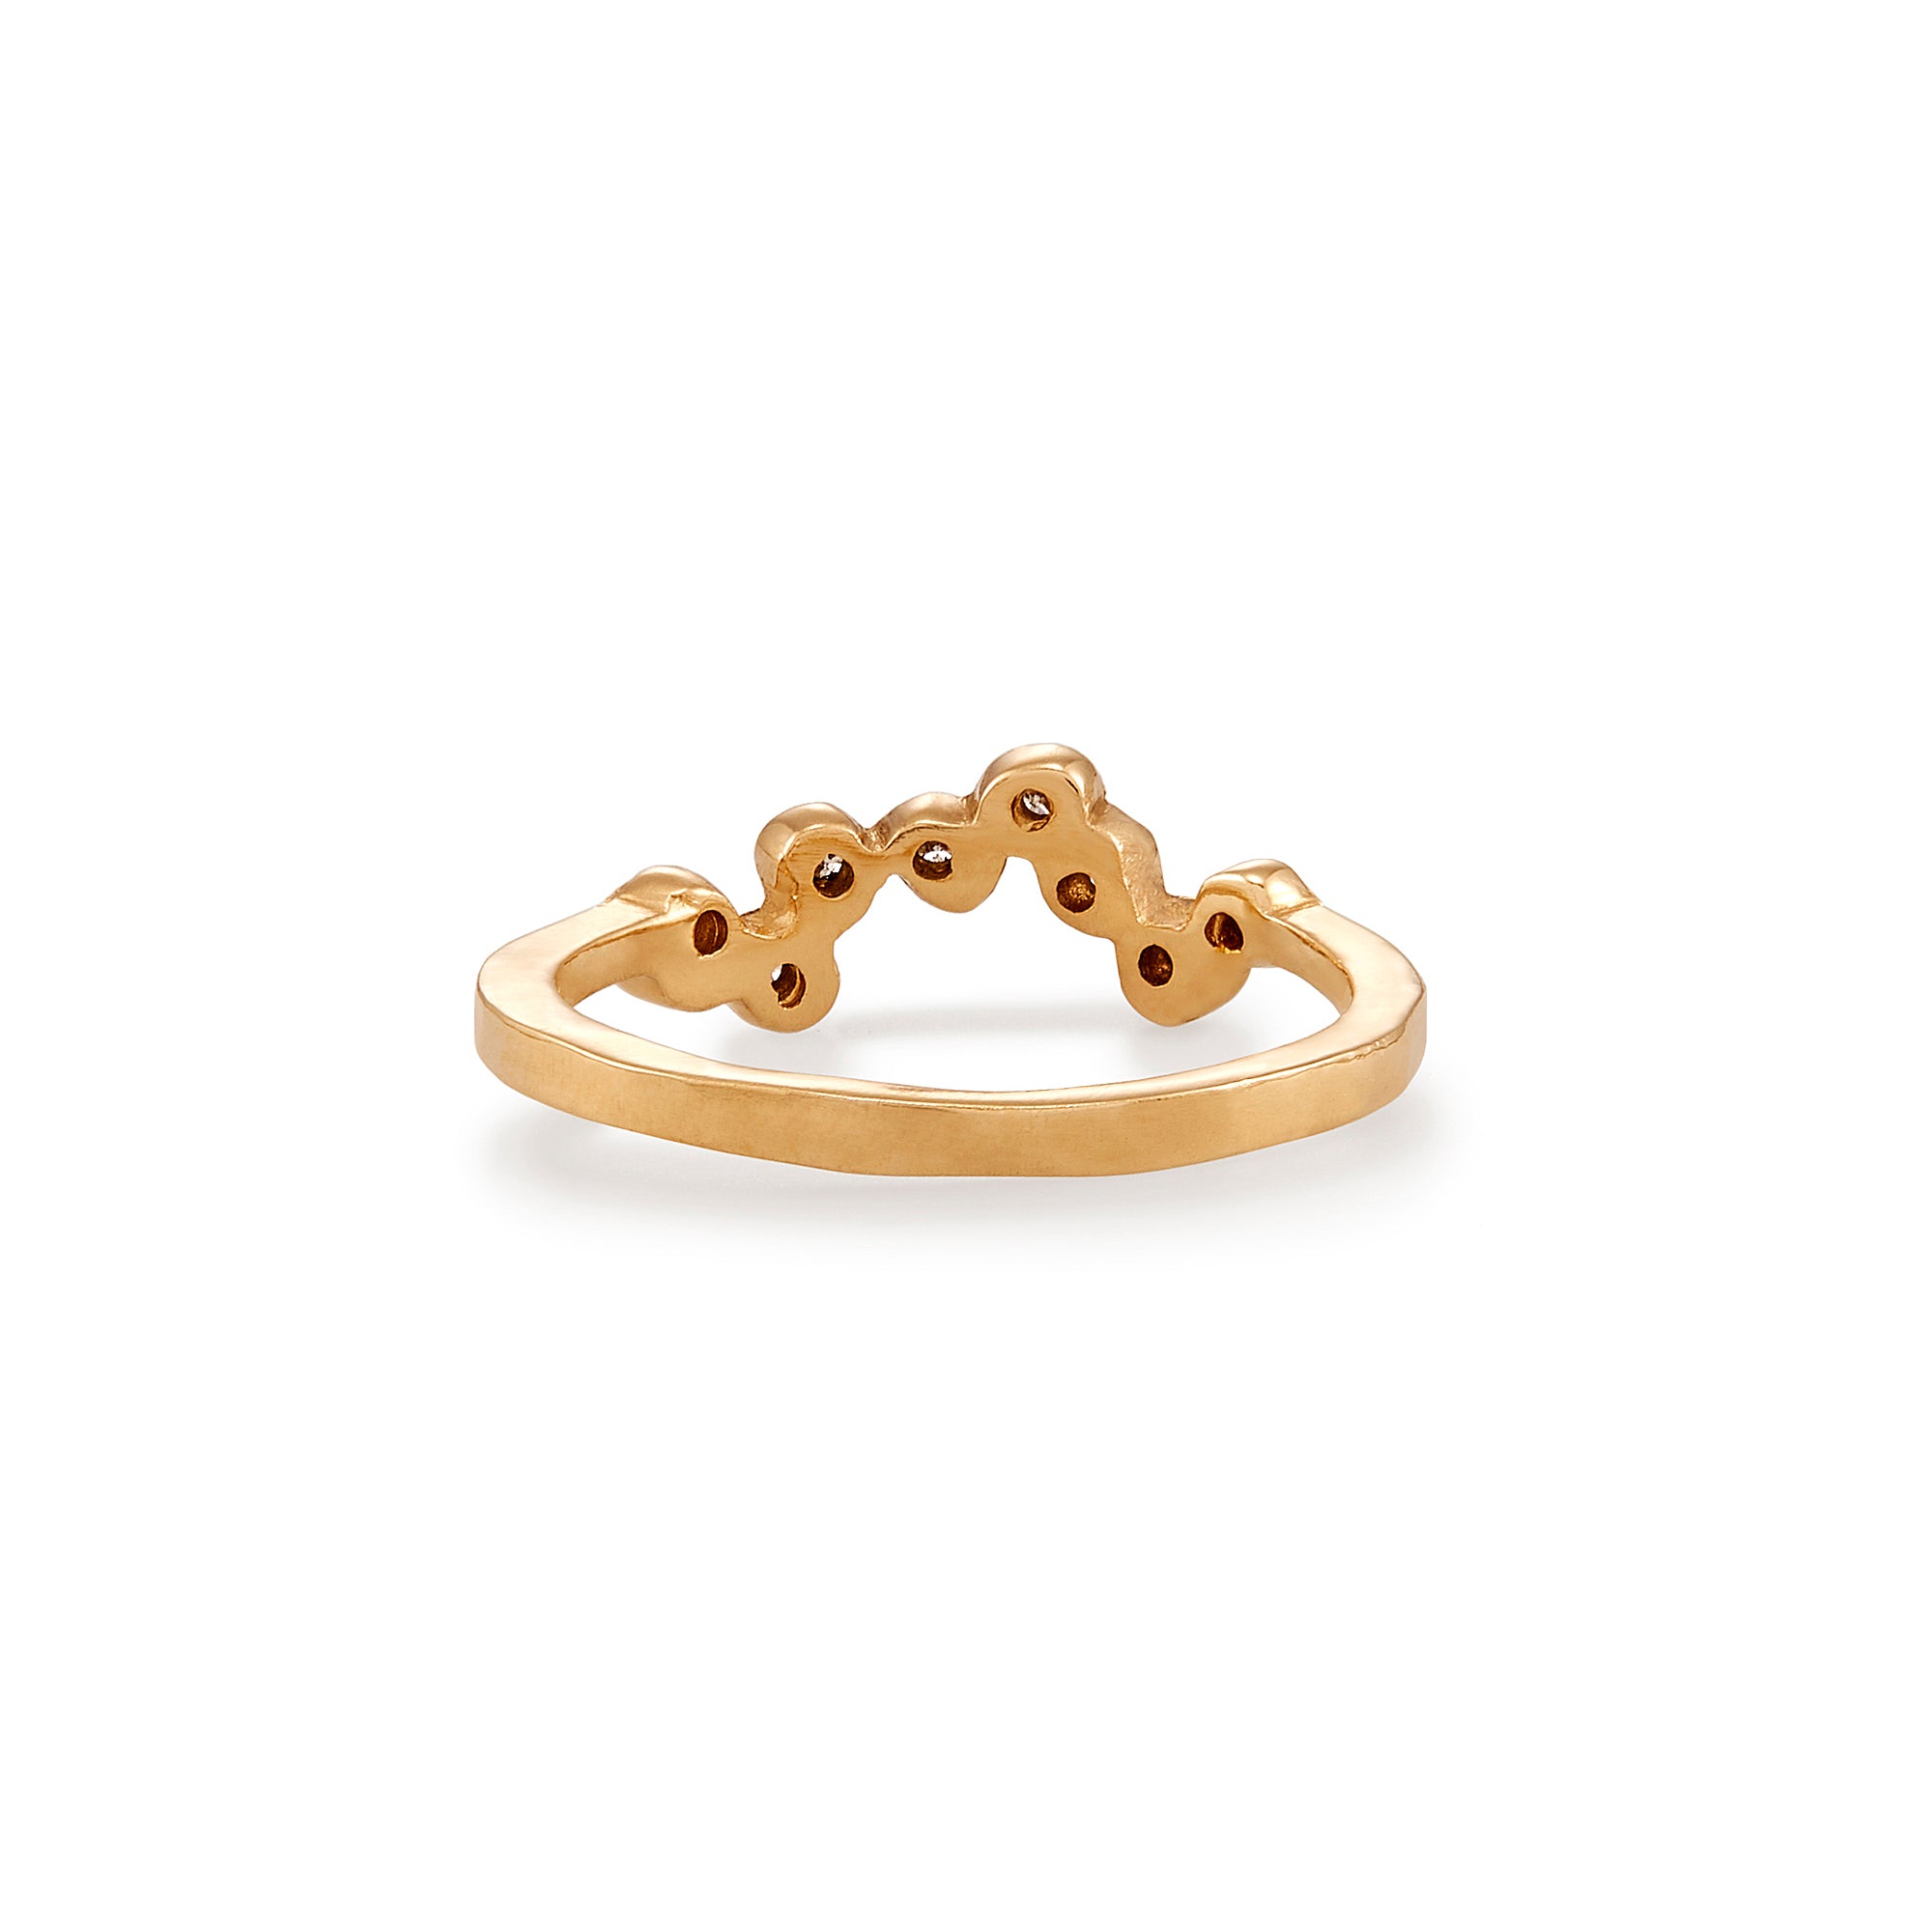  This unique Wave Contour Band makes a great complement to an engagement ring or as an addition to a stack.